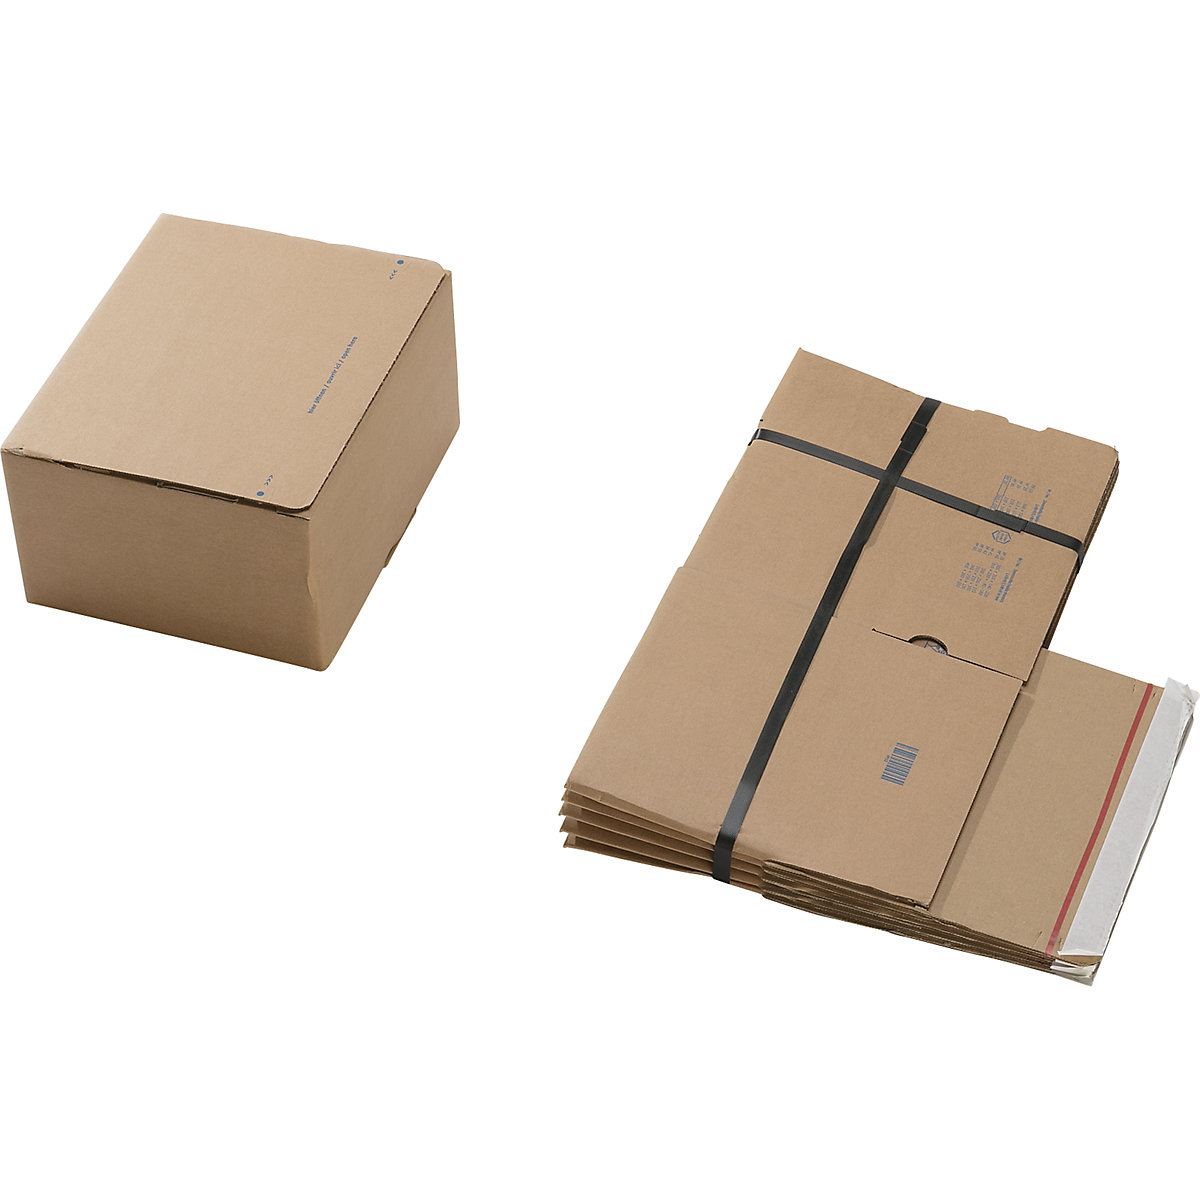 Dispatch cartons, with automatic base and self adhesive seal, internal dims. LxWxH 260 x 220 x 130 mm, pack of 100-5